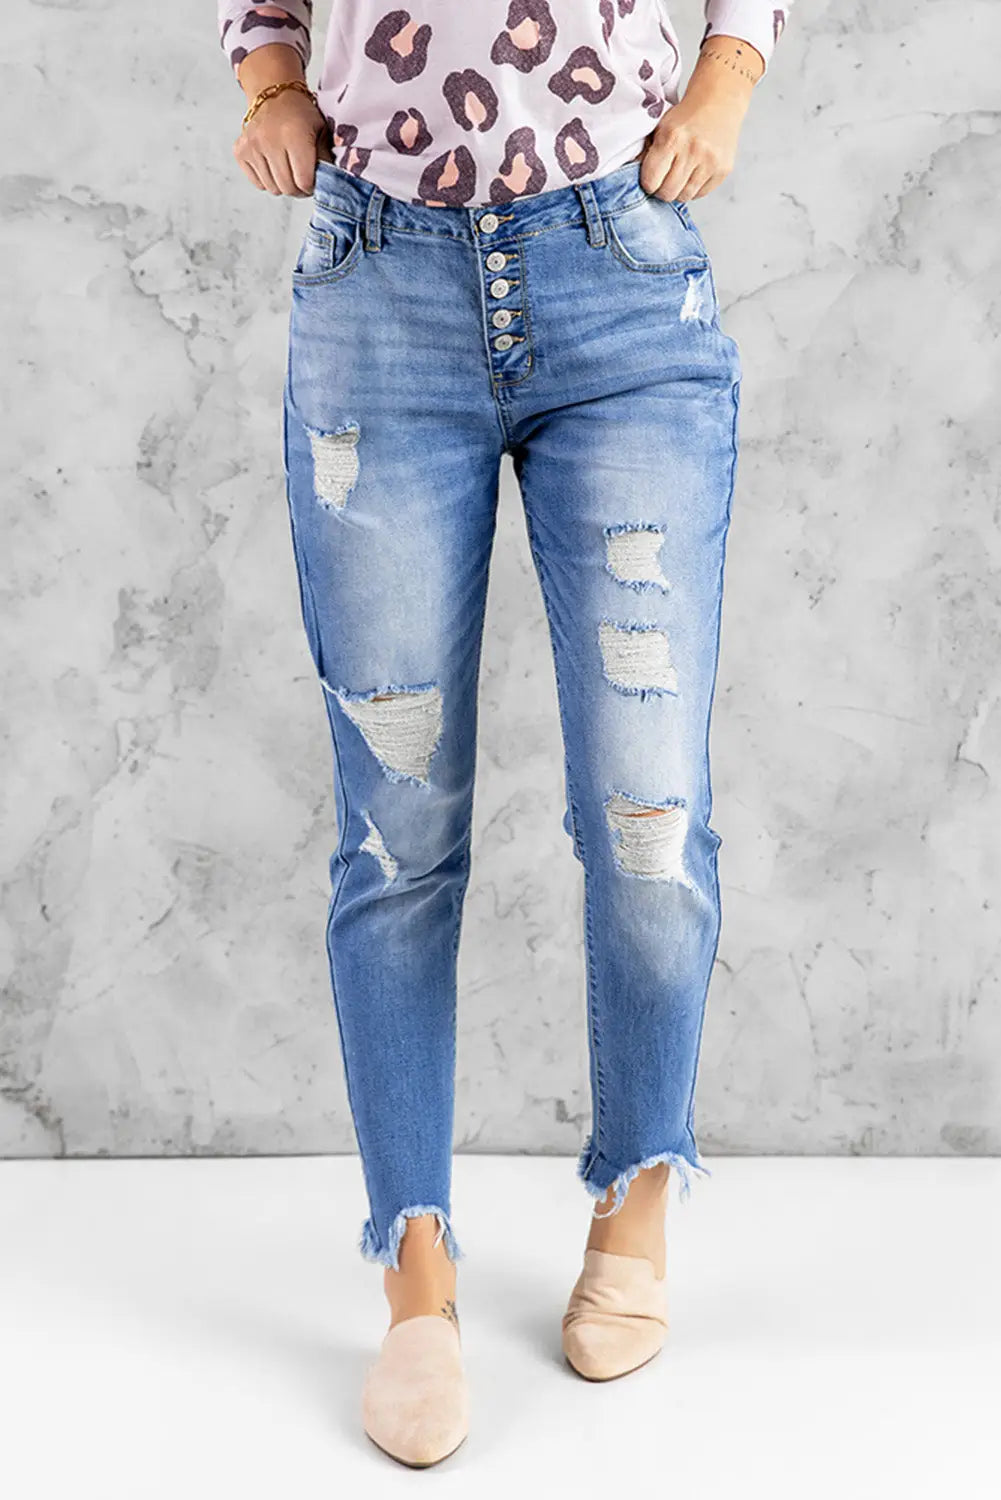 Sky blue high rise button front frayed ankle skinny jeans - s / 71% cotton + 27.5% polyester + 1.5% spandex